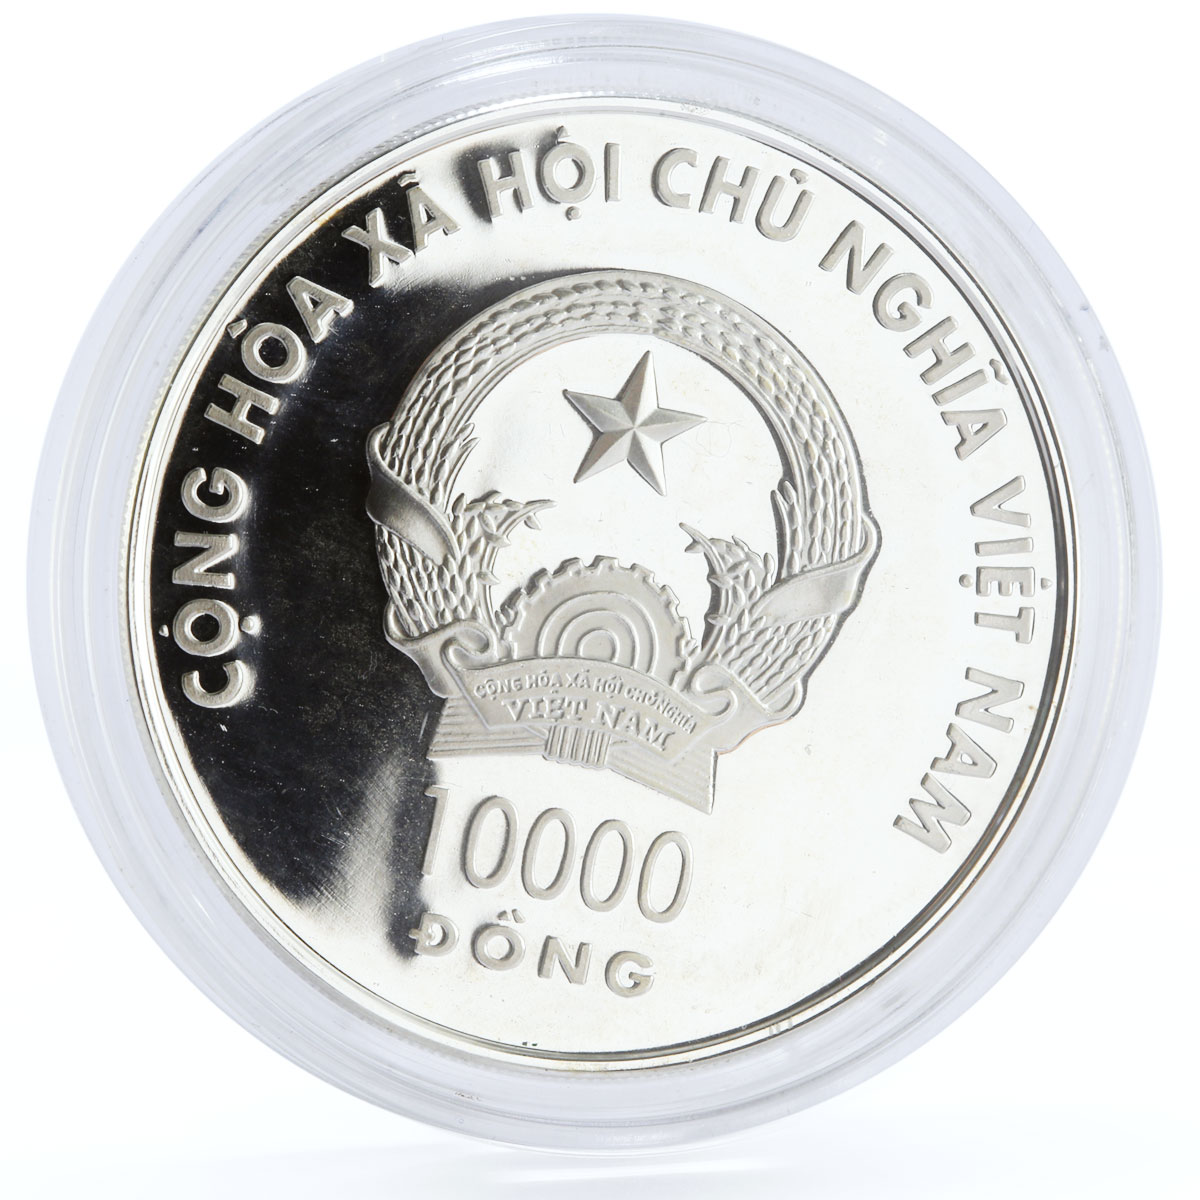 Vietnam 10000 dong Football World Cup in Germany Pagoda proof silver coin 2006